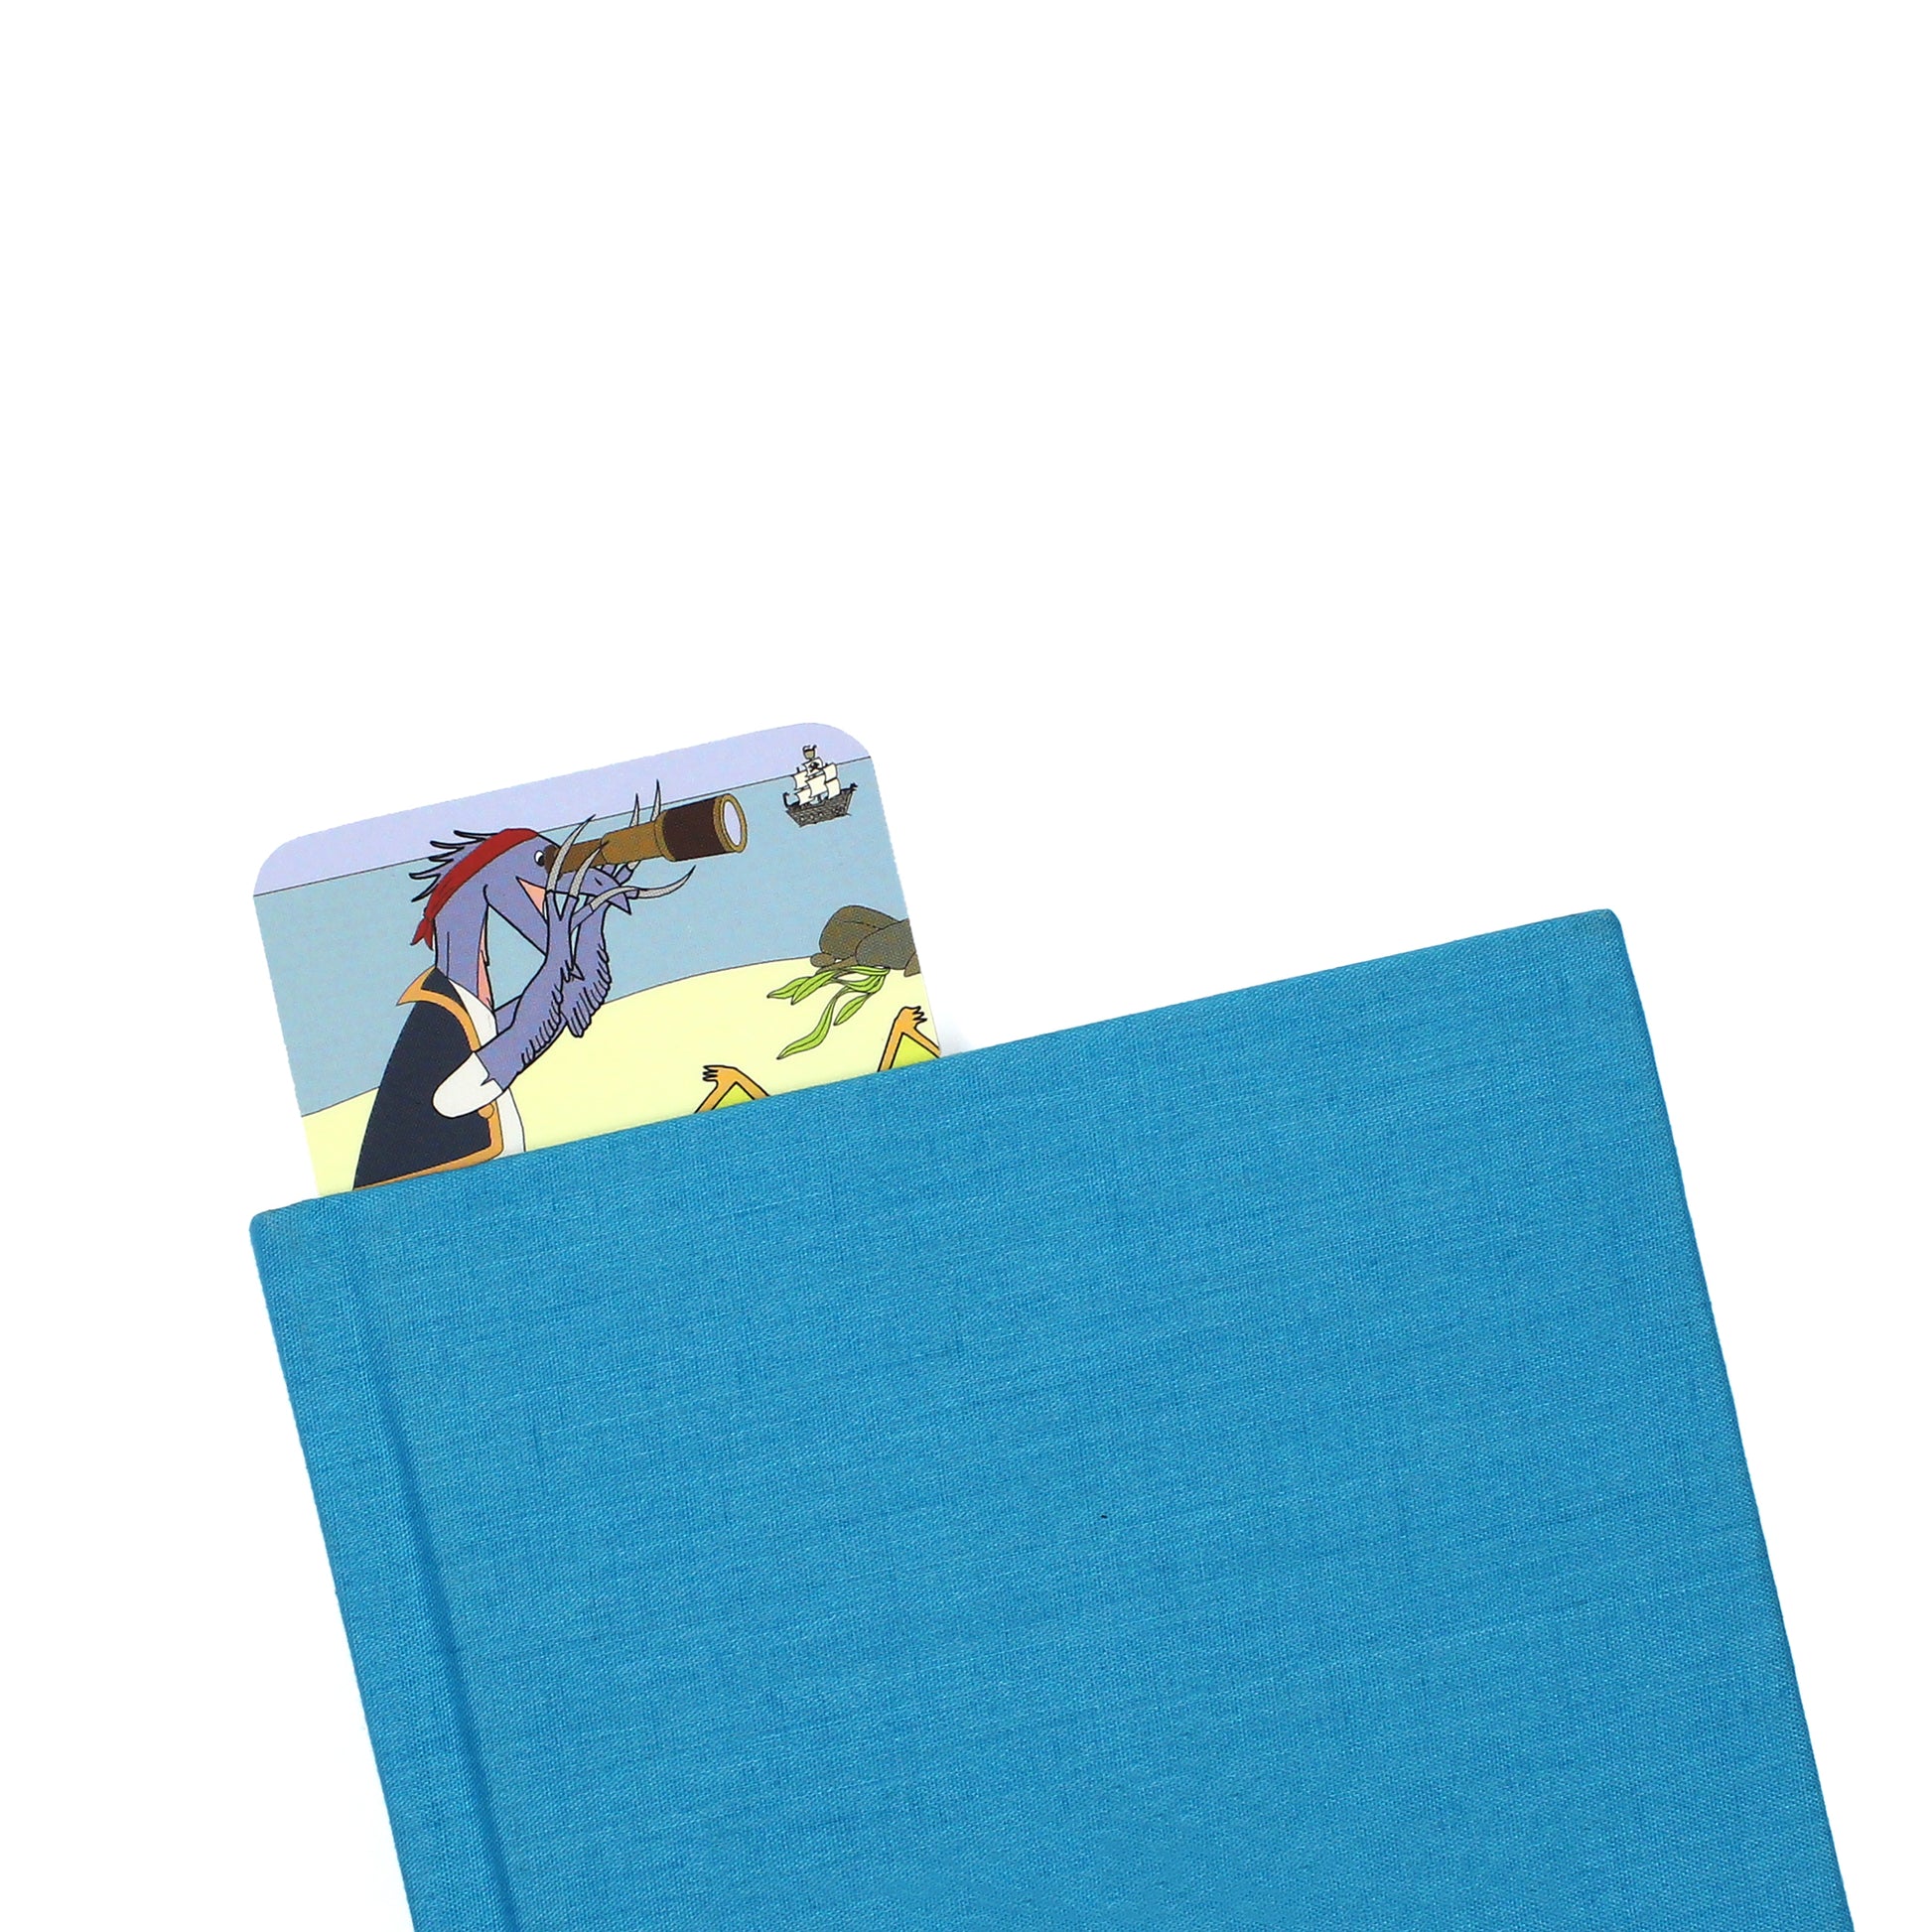 pirate bookmark coming out of a blue book